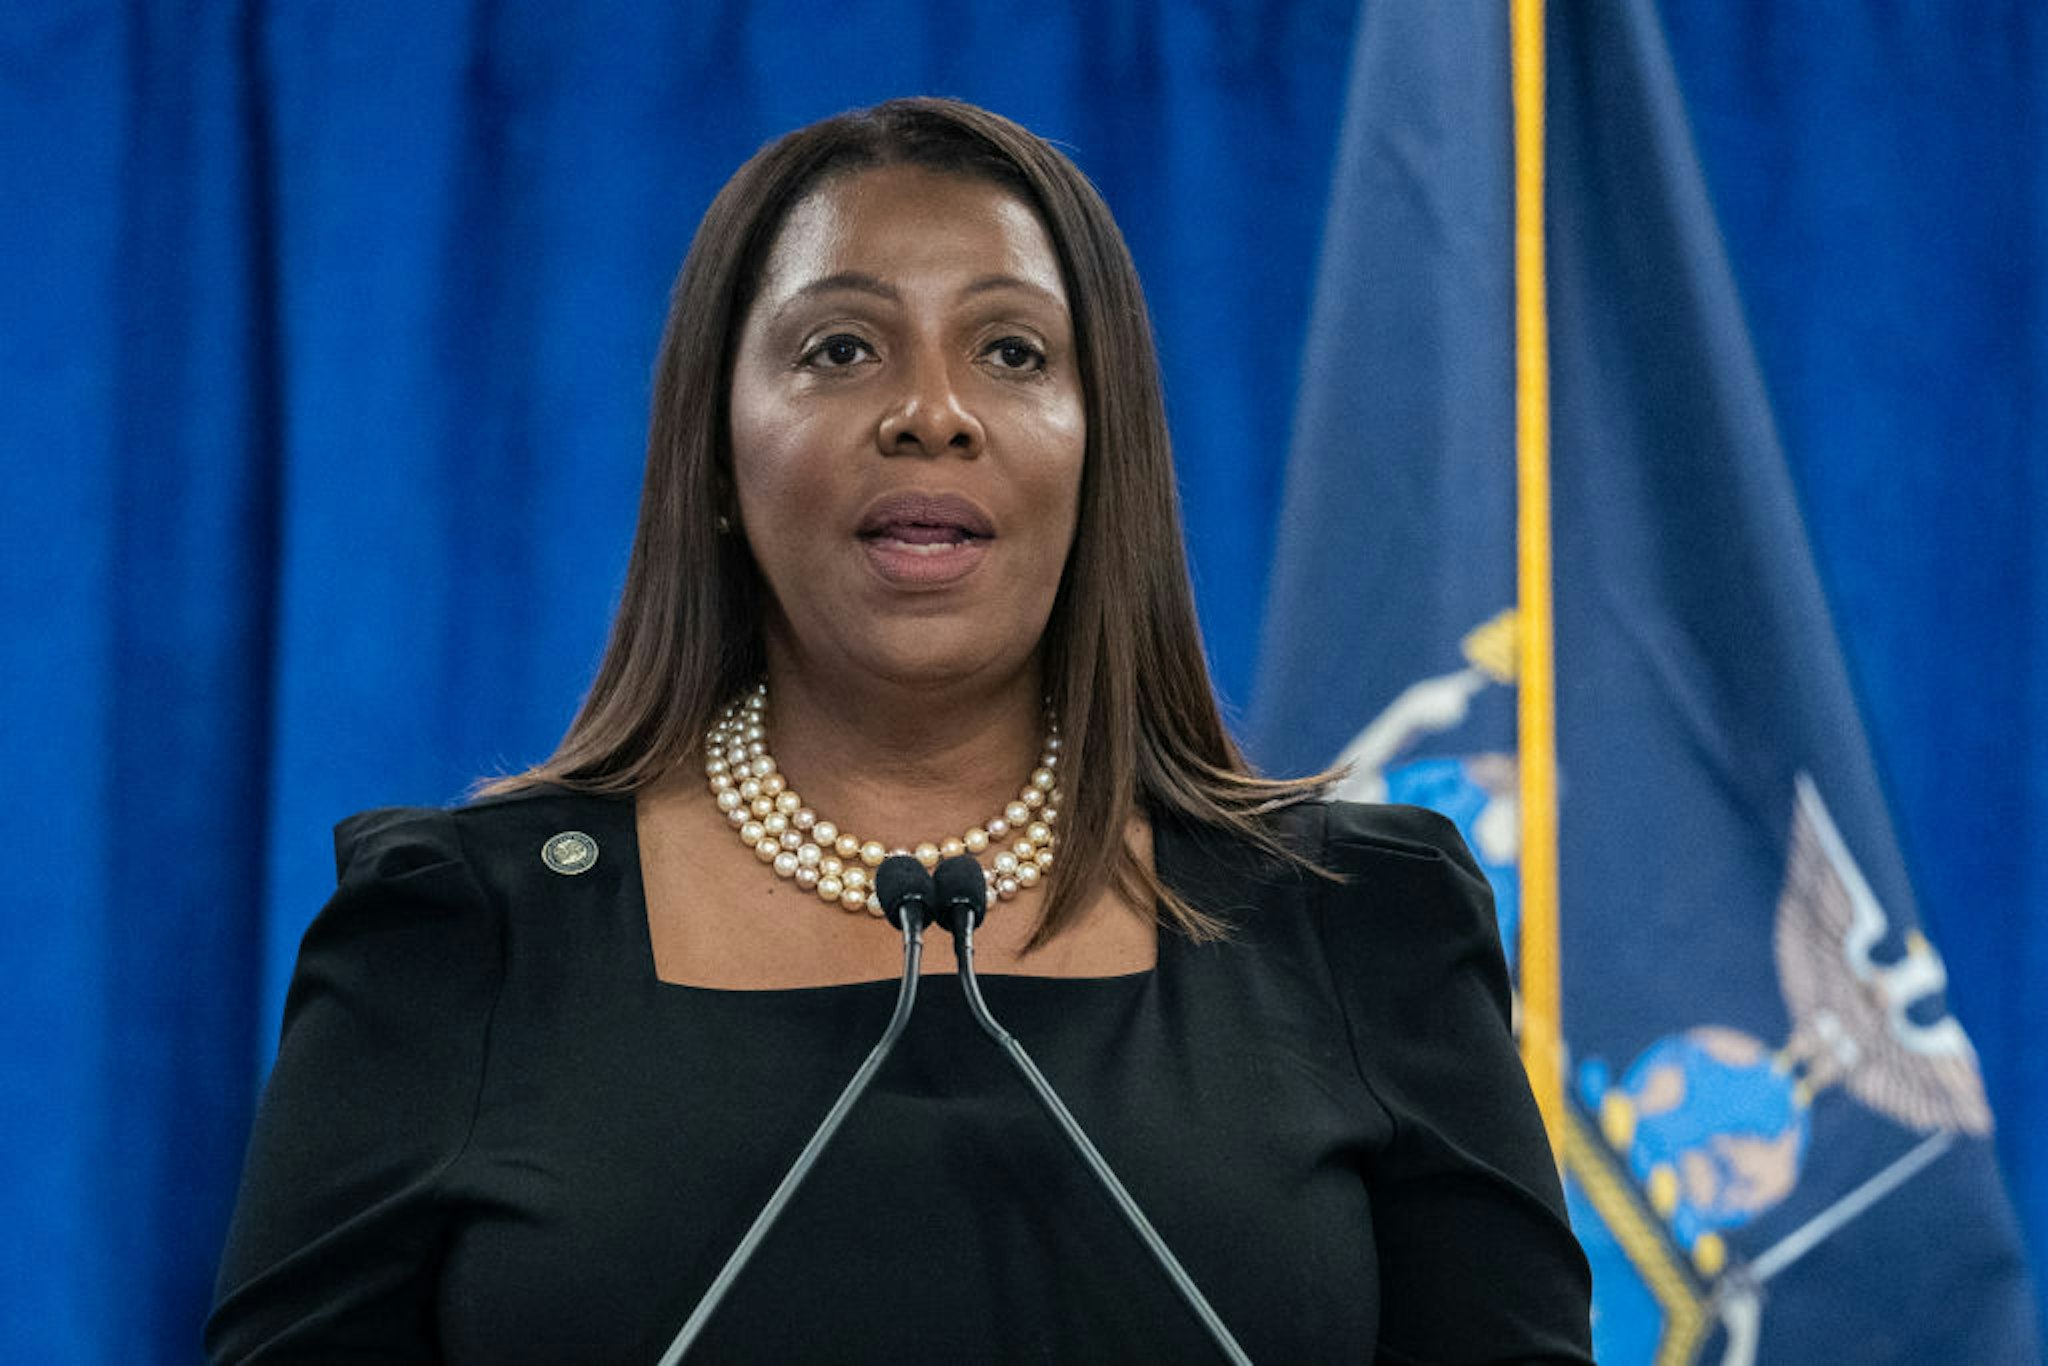 Letitia James, New York's attorney general, speaks during a news conference in New York, US, on Friday, Feb. 16, 2024. Donald Trump and his real estate company suffered a major defeat in New Yorks civil fraud suit over his inflated asset valuations, after a judge barred the former president from running any business in the state for three years and ordered the return of $364 million in illegal profits.